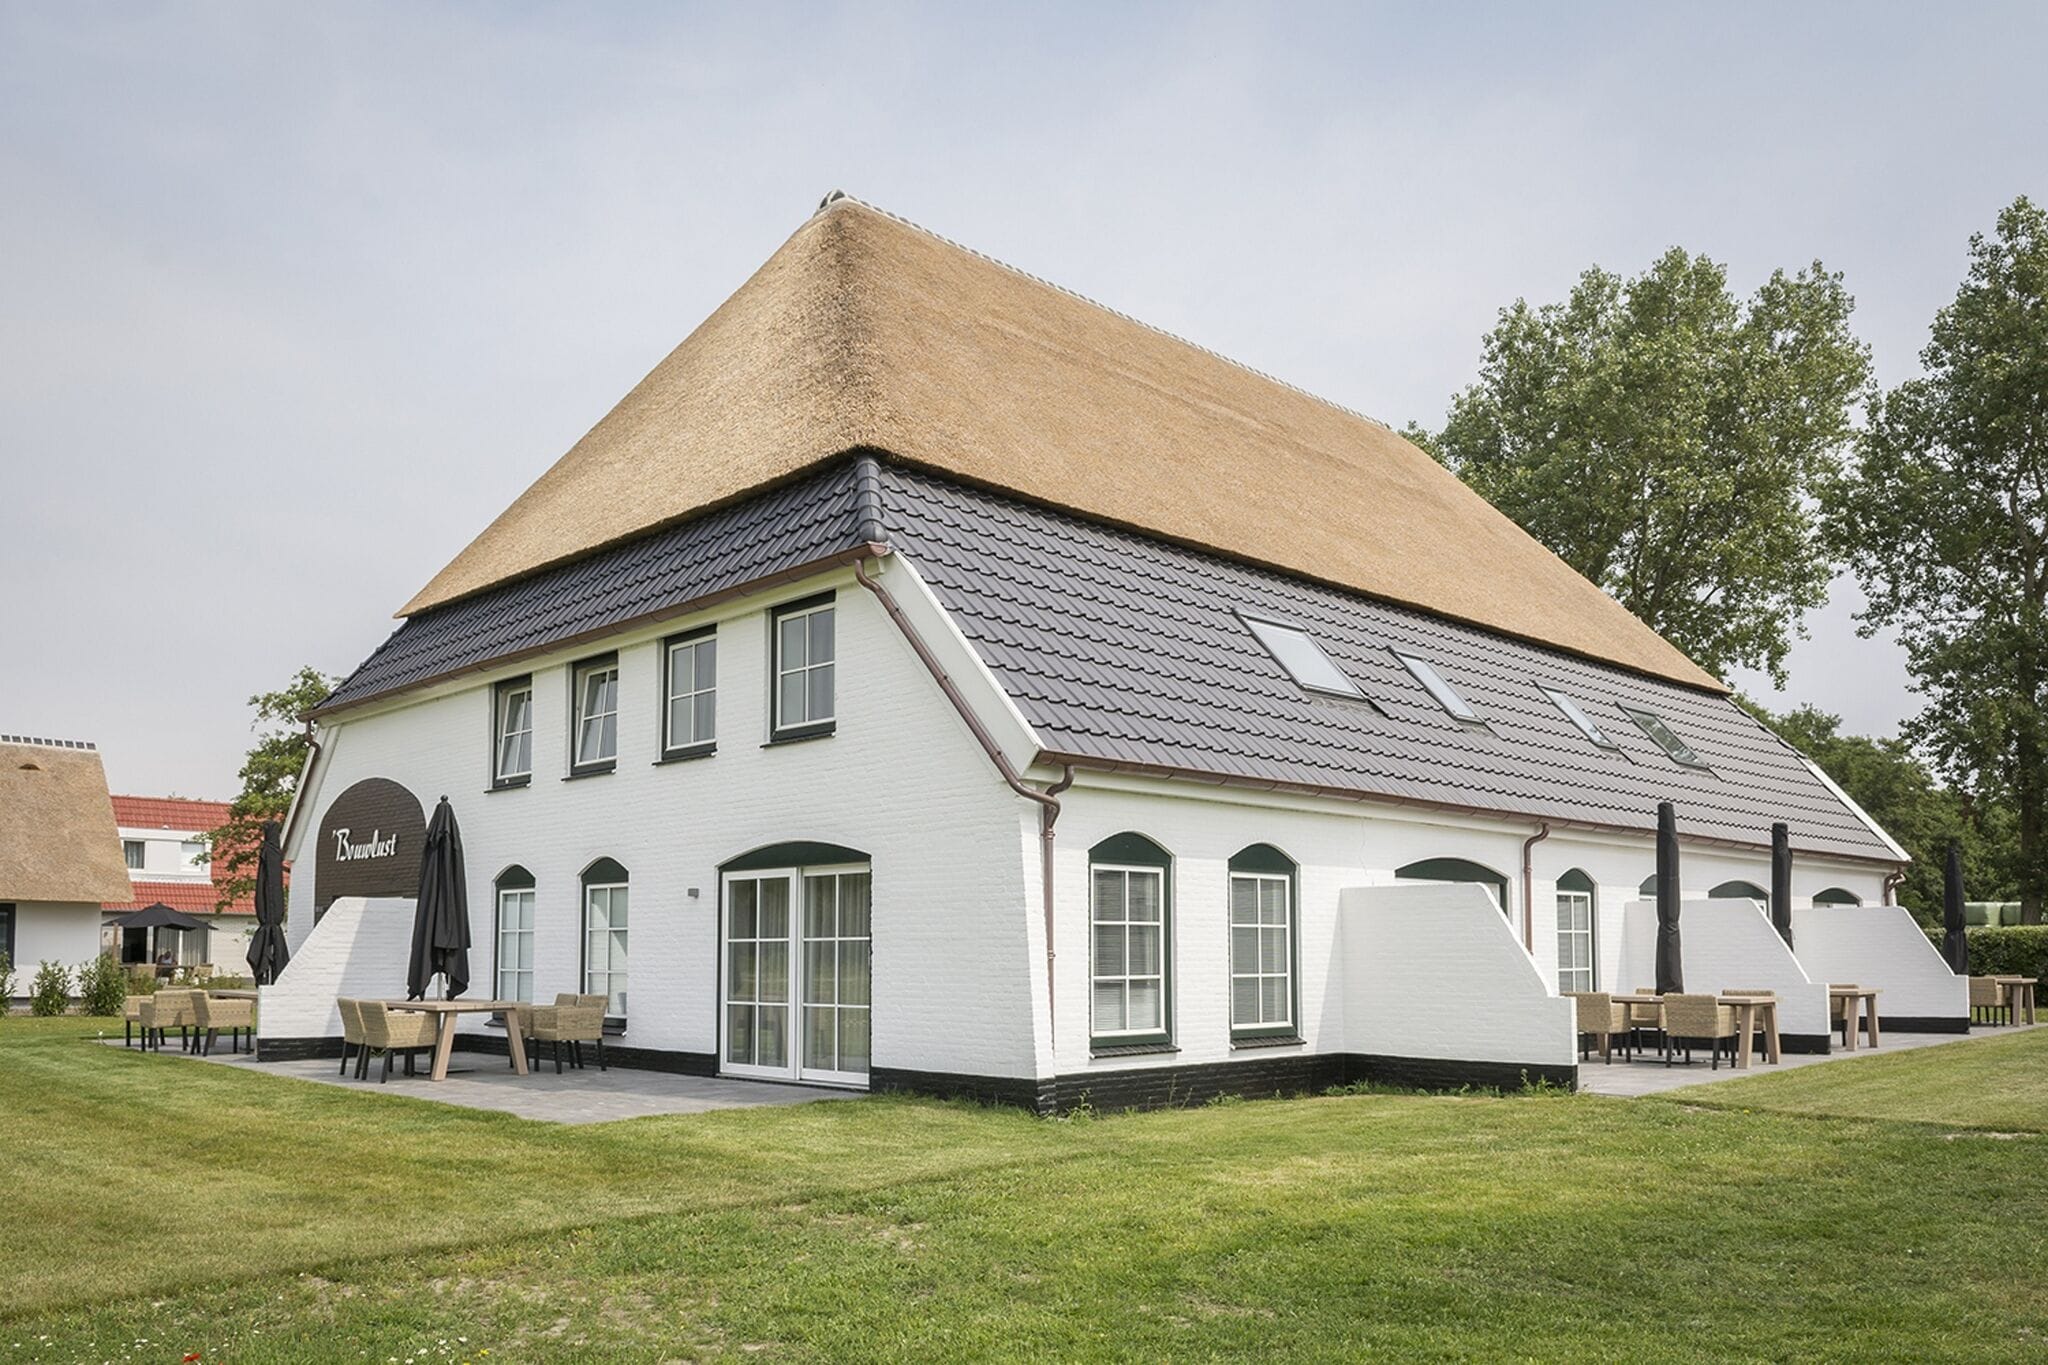 Apartment in tasteful farmhouse in De Cocksdorp, on the Wadden island of Texel